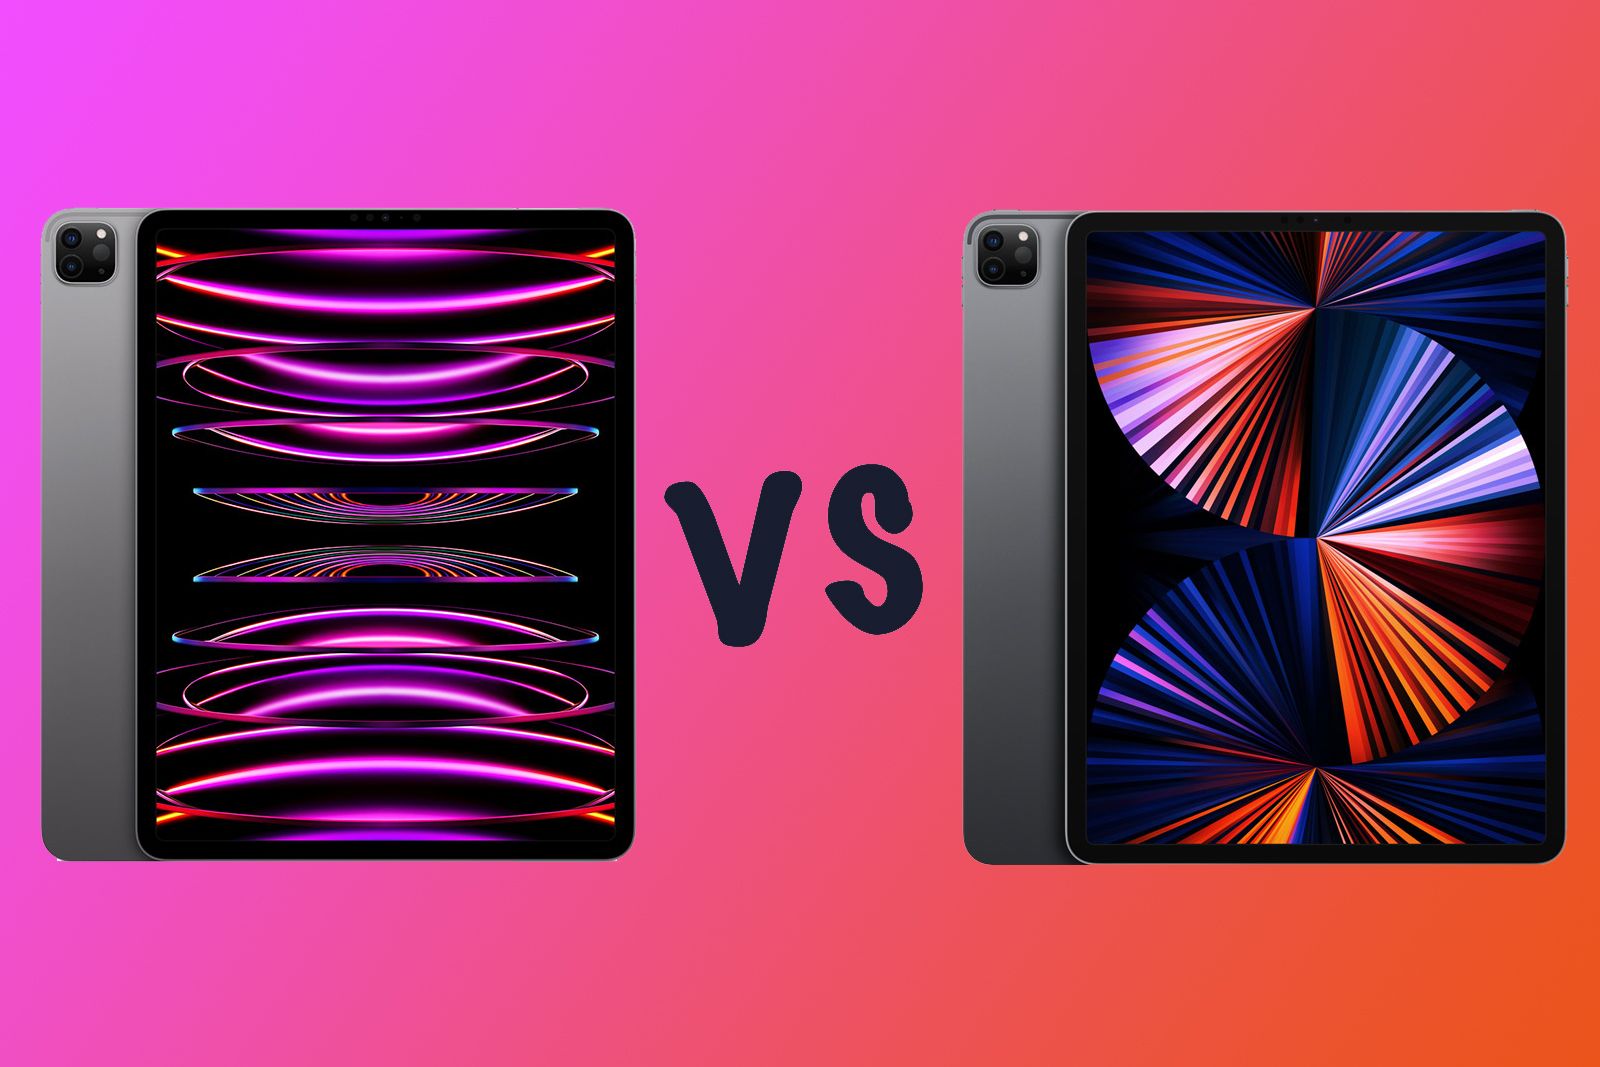 Apple iPad Pro 12.9-inch (2022) vs iPad Pro 12.9-inch (2021): What's the difference?